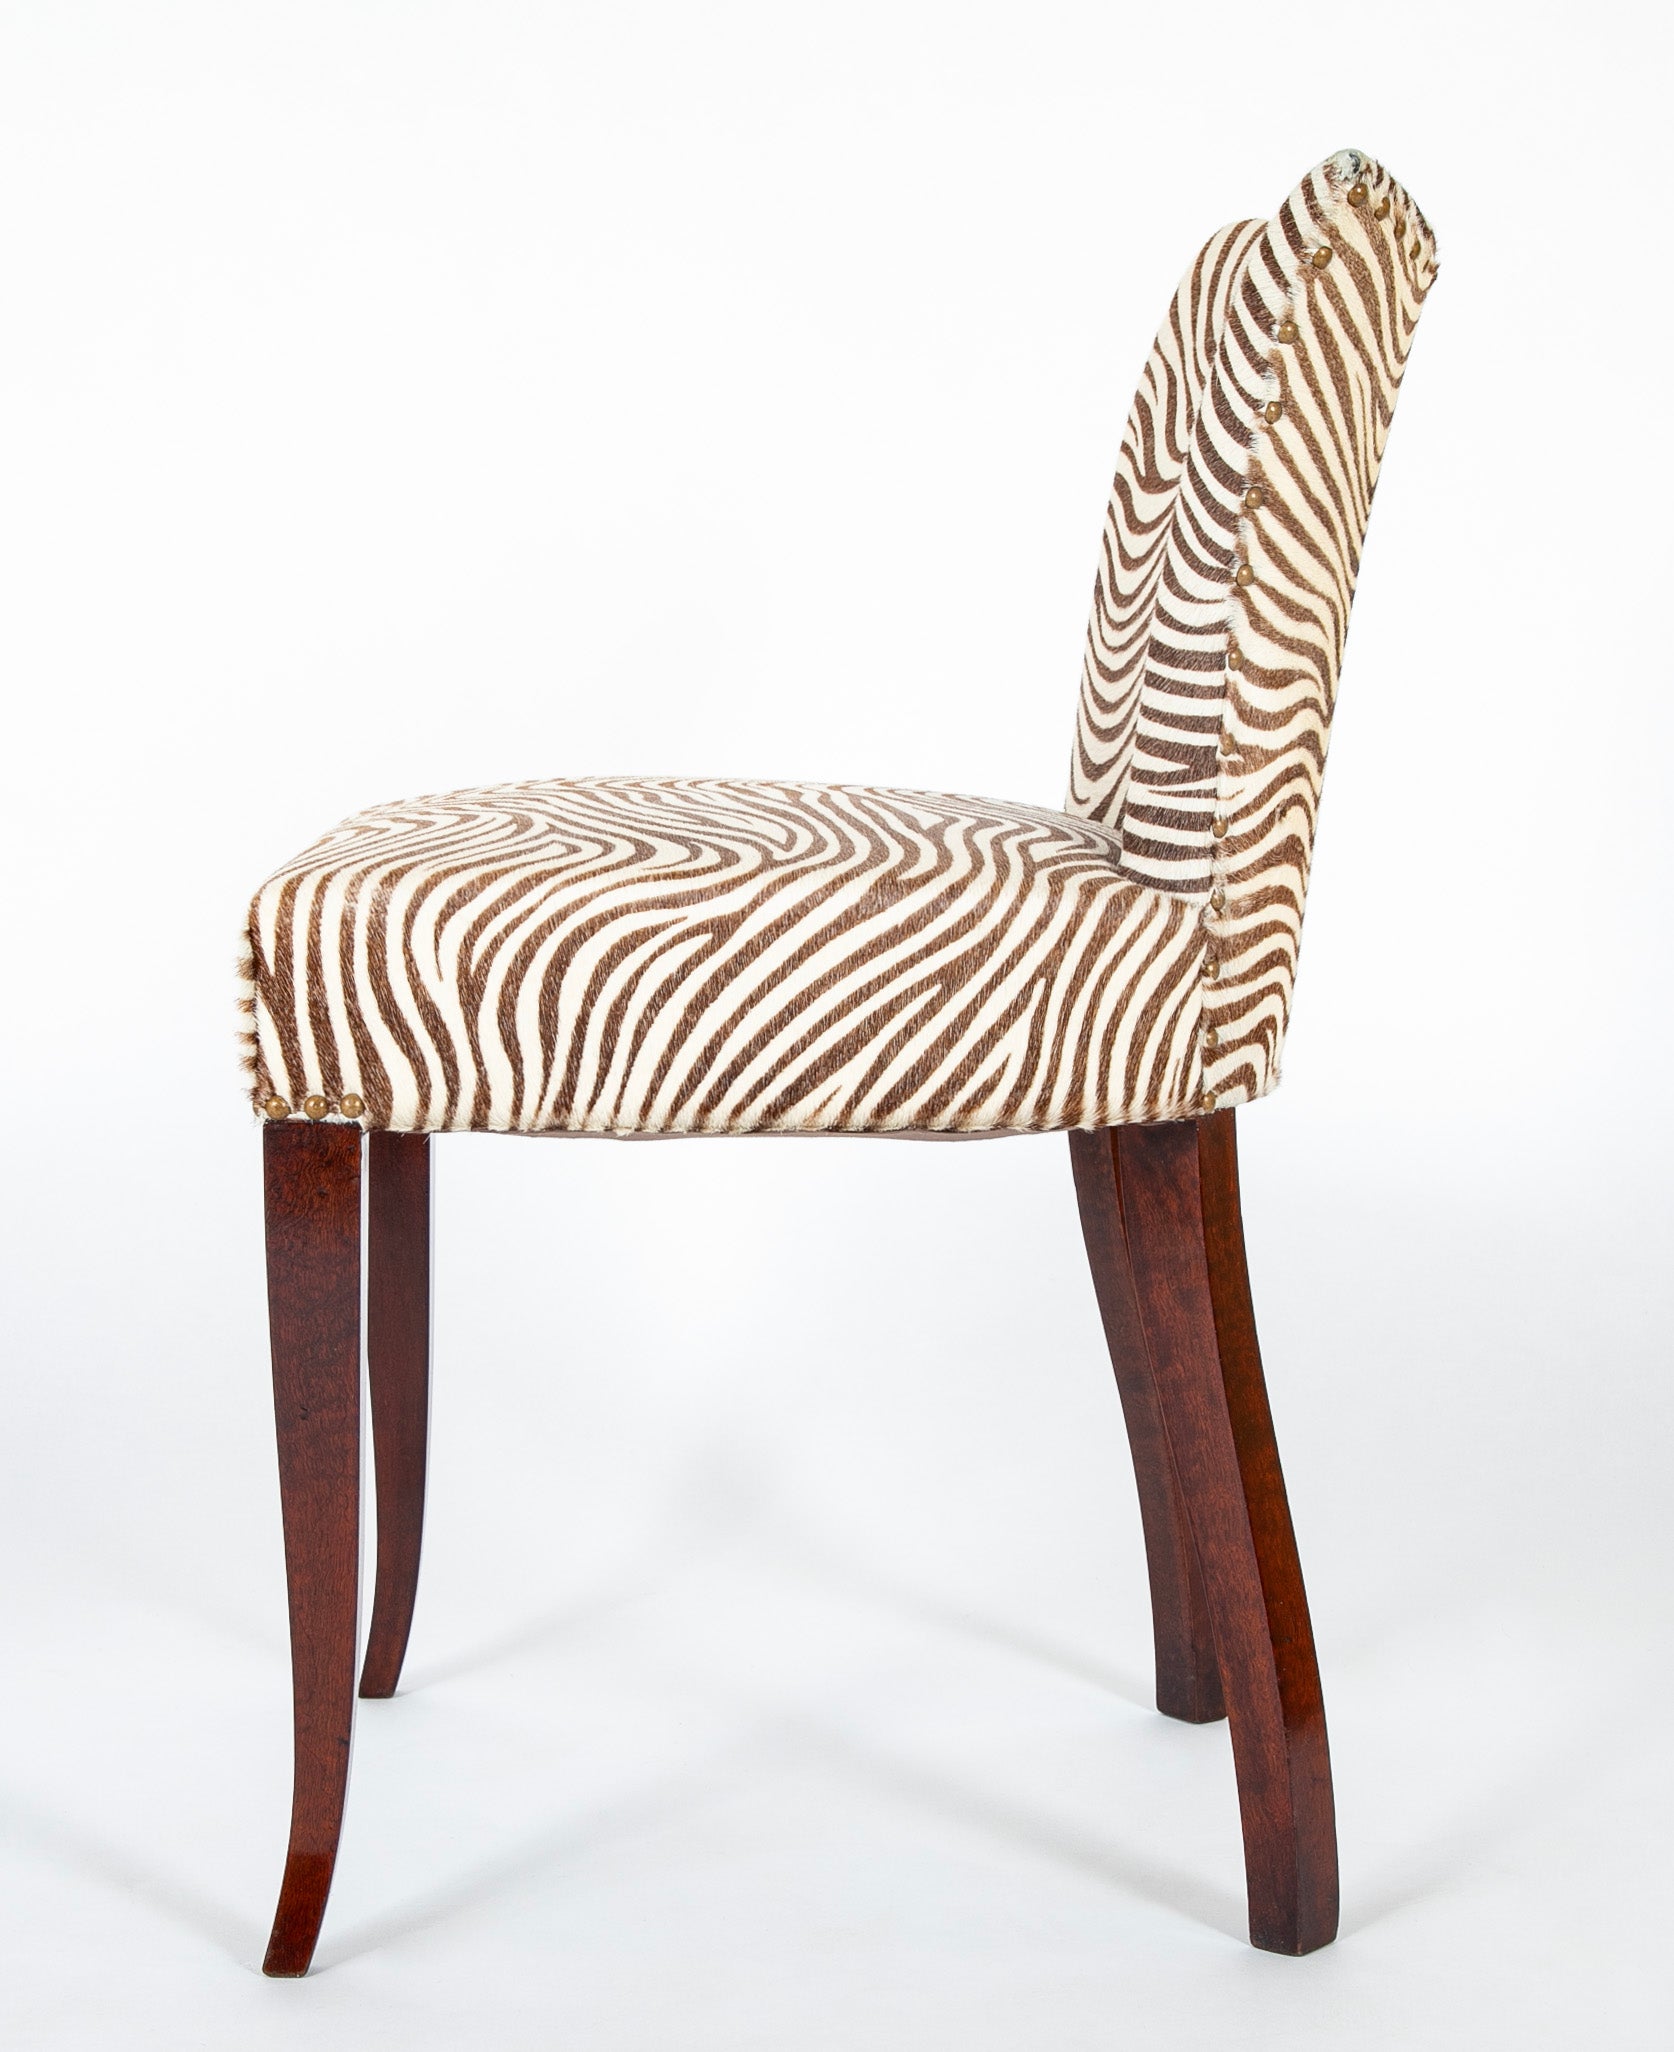 Pair of Maison Dominique Side Chairs In Faux Zebra-Pony Hide